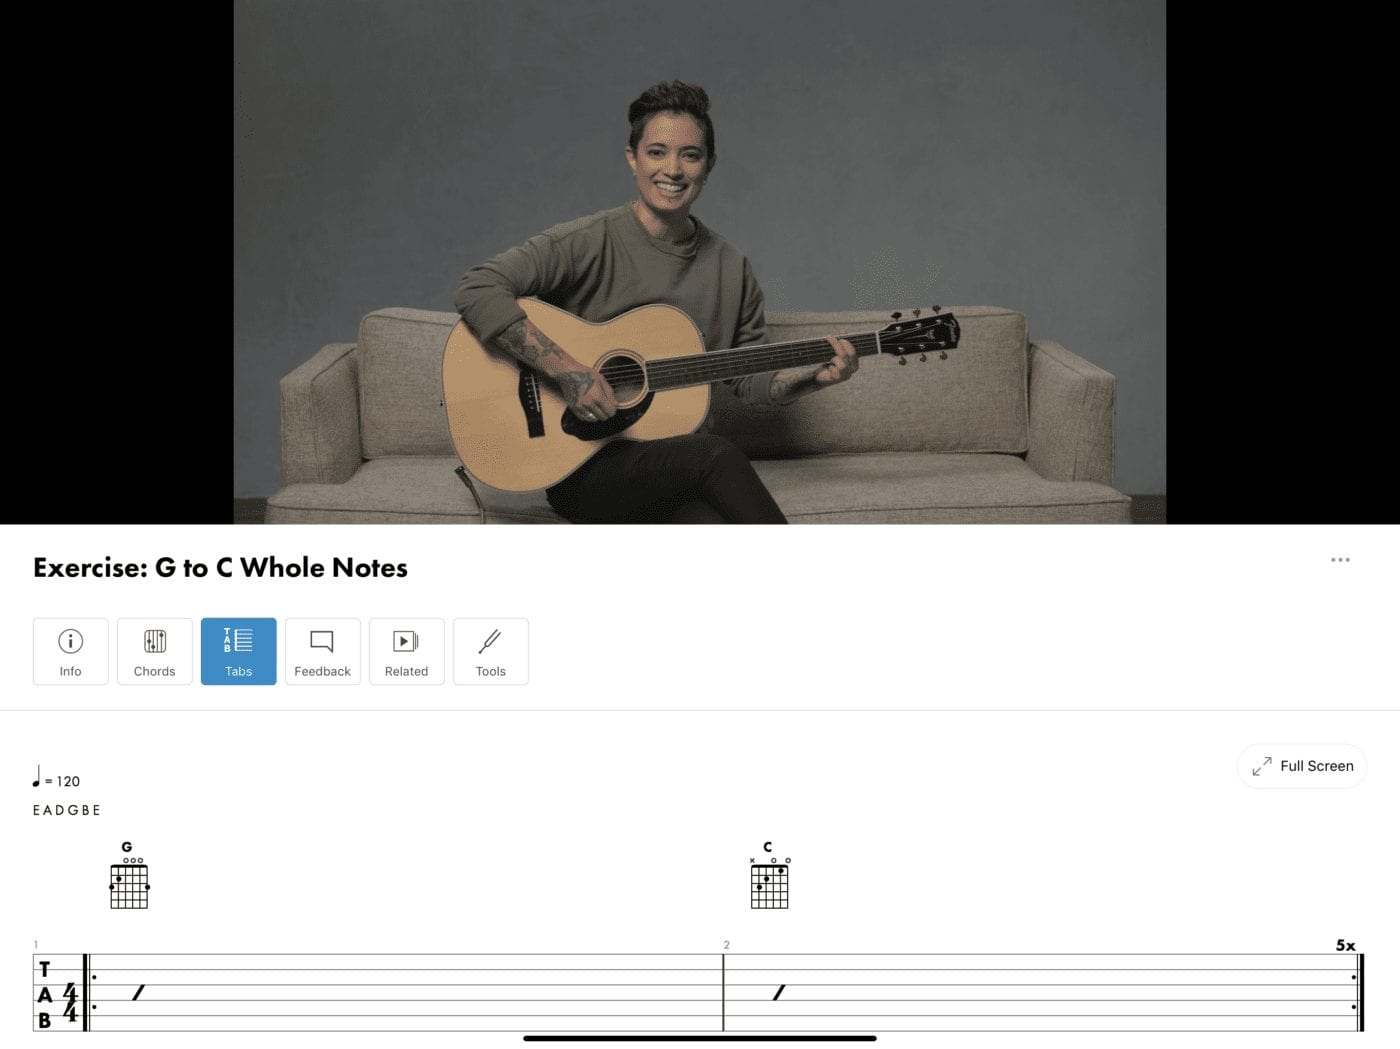 A typical Level One exercise in Fender Play showing video at top, notes and chord charts below